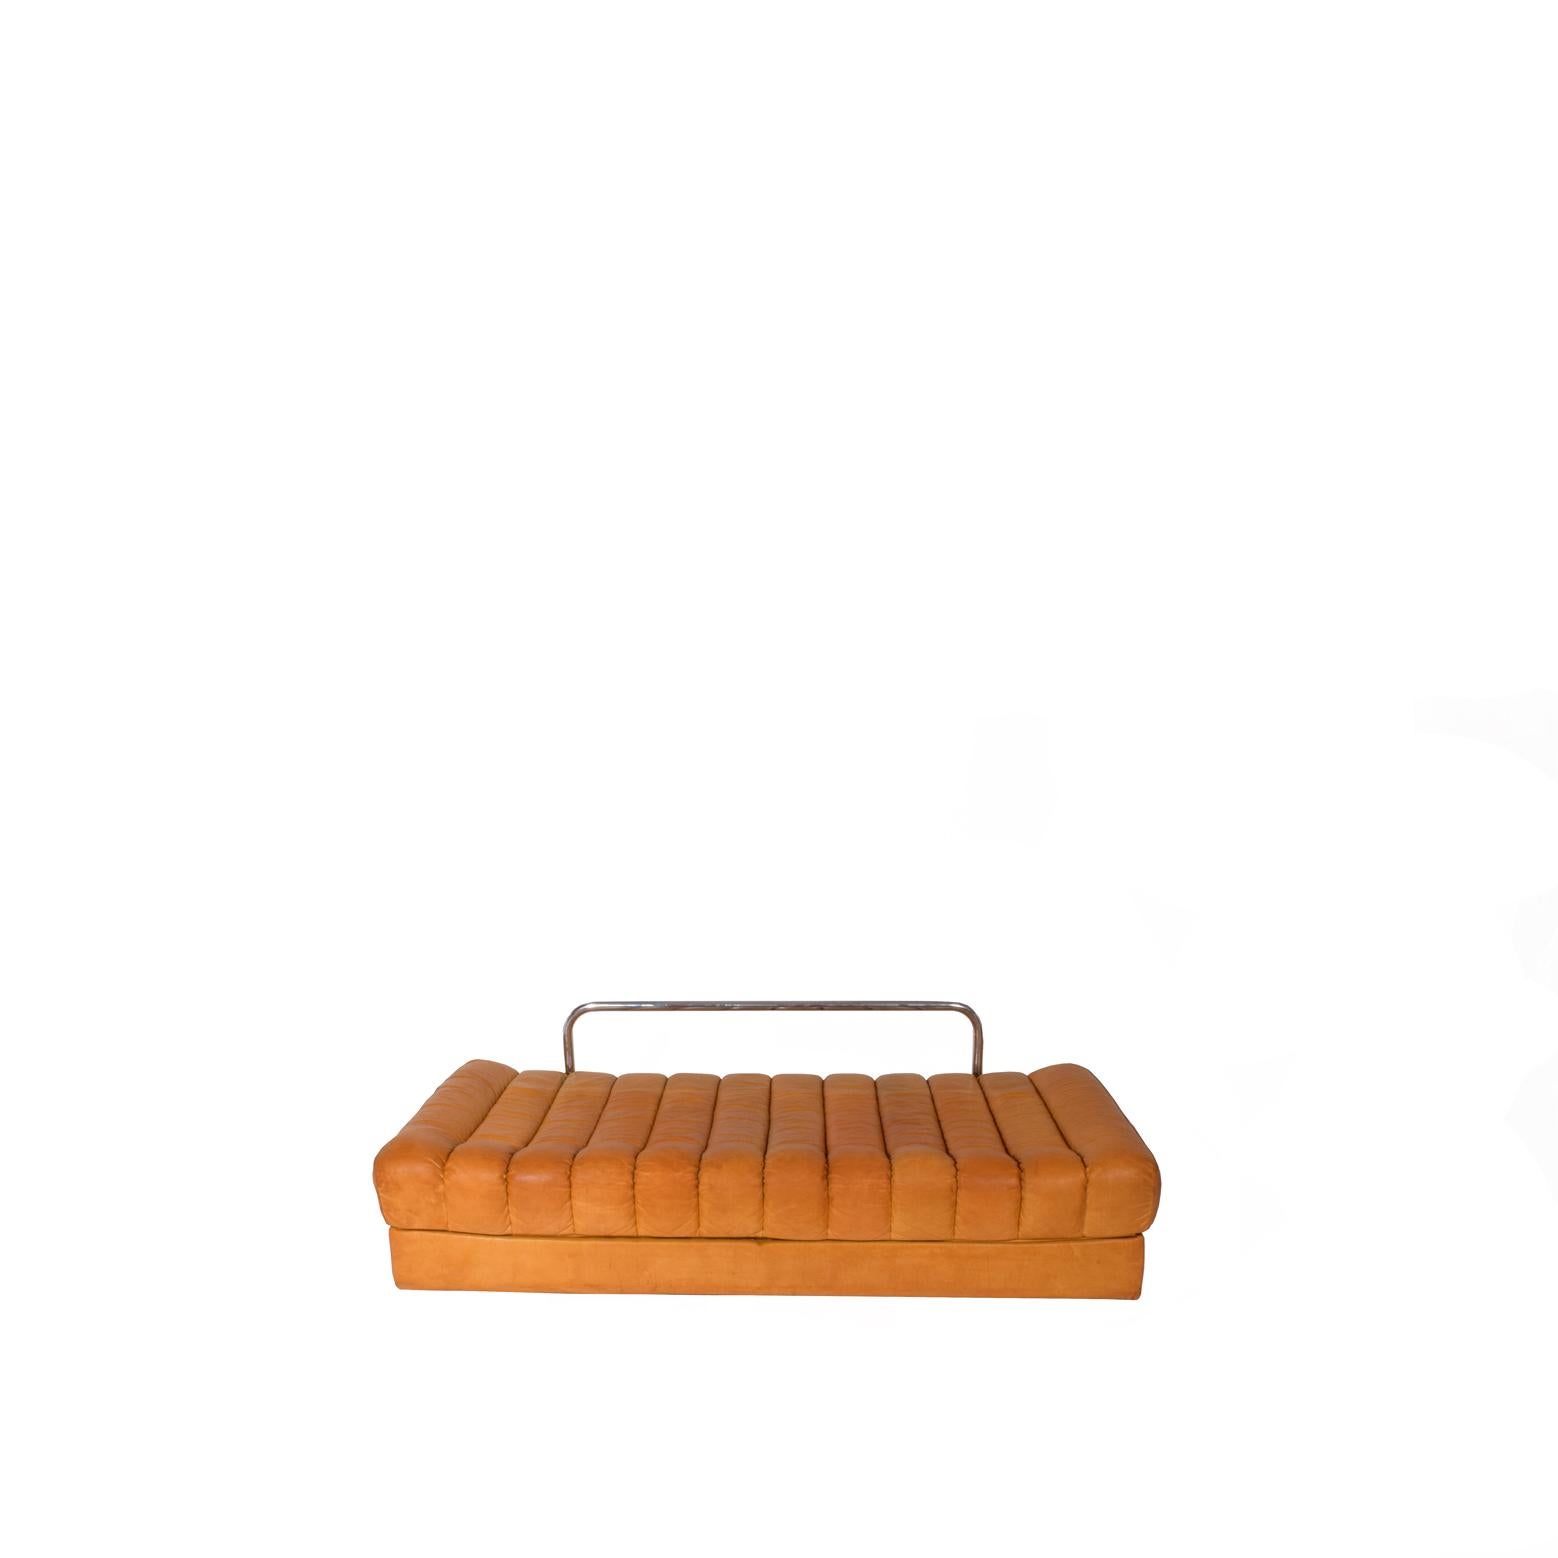 Swiss De Sede DS 85 Natural Daybed Leather Sofa / Bed